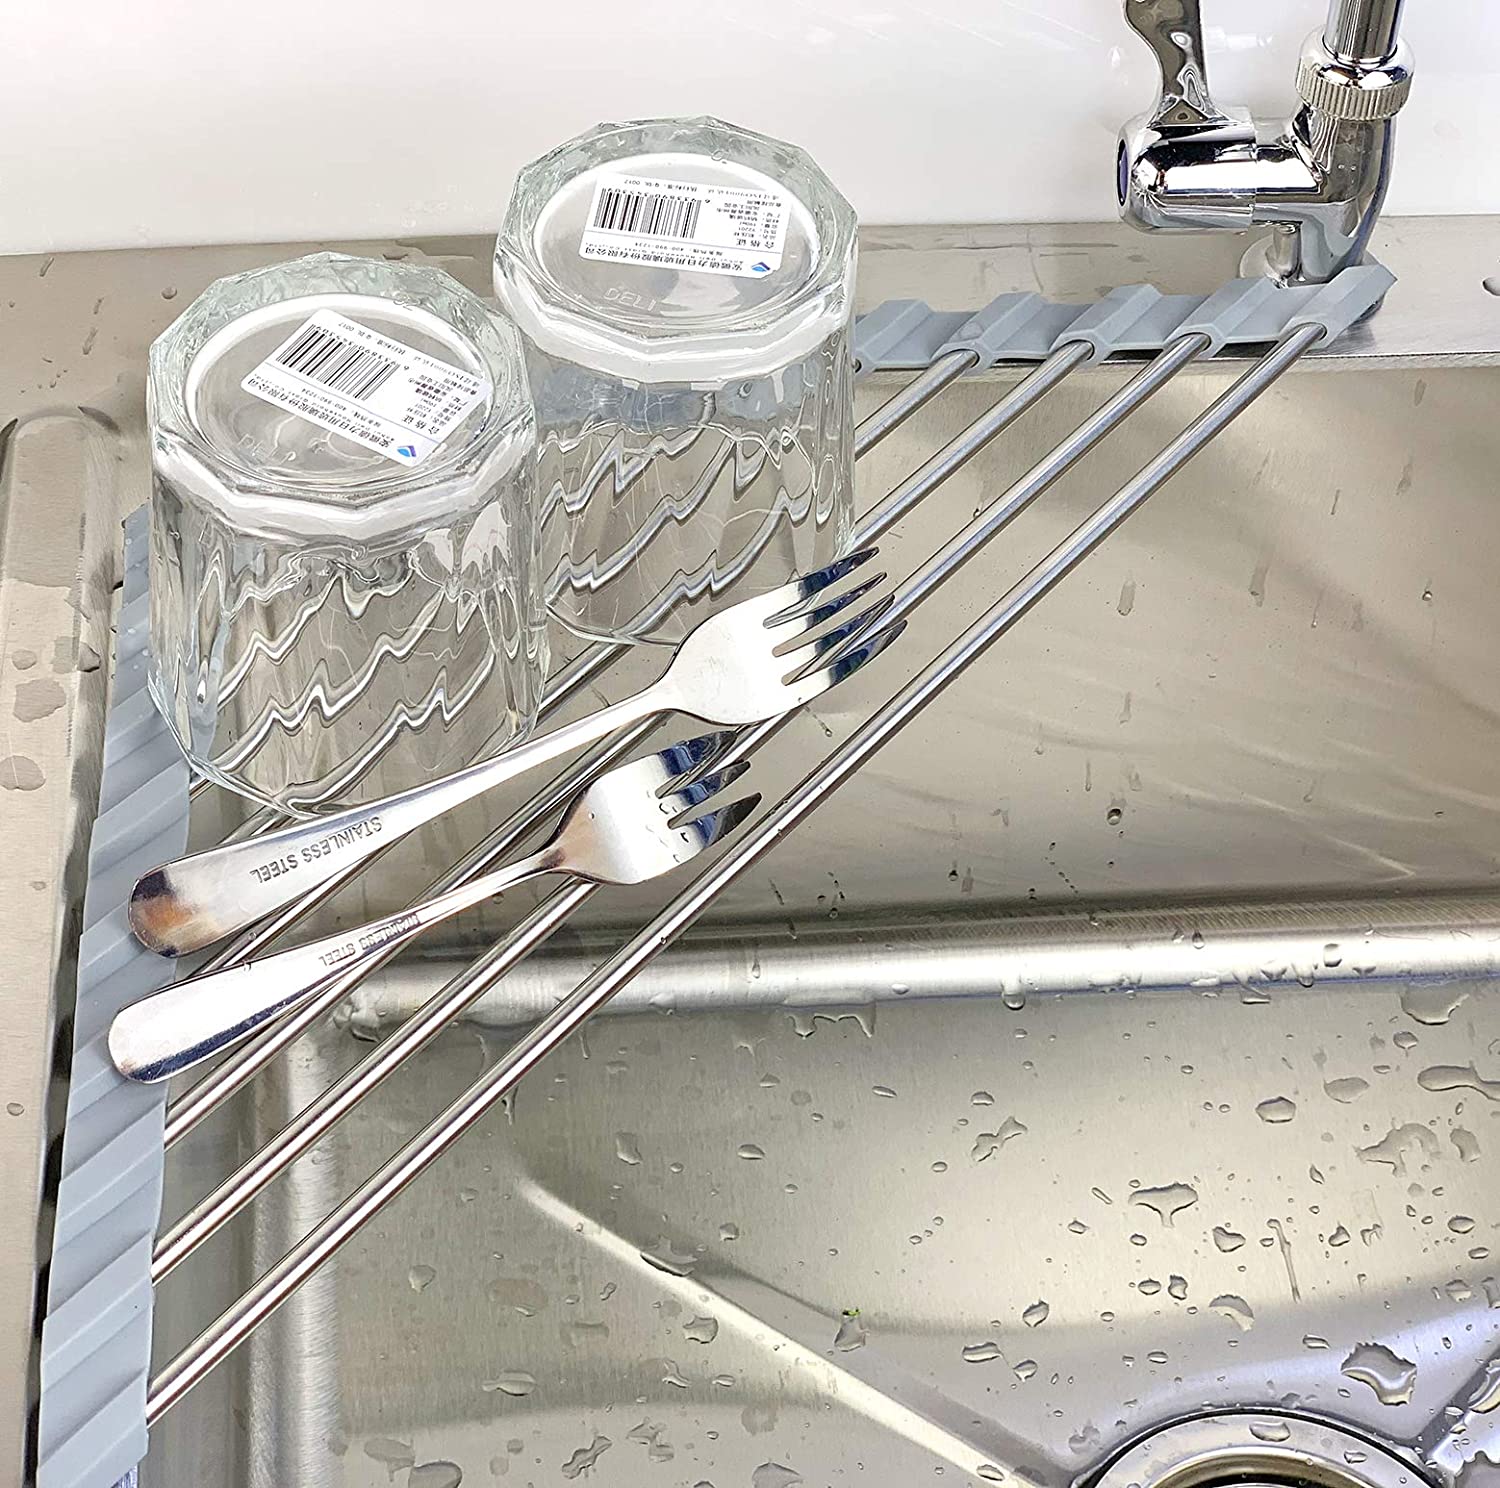 Triangle Dish Drying Rack for Sink Corner - Finding Easy